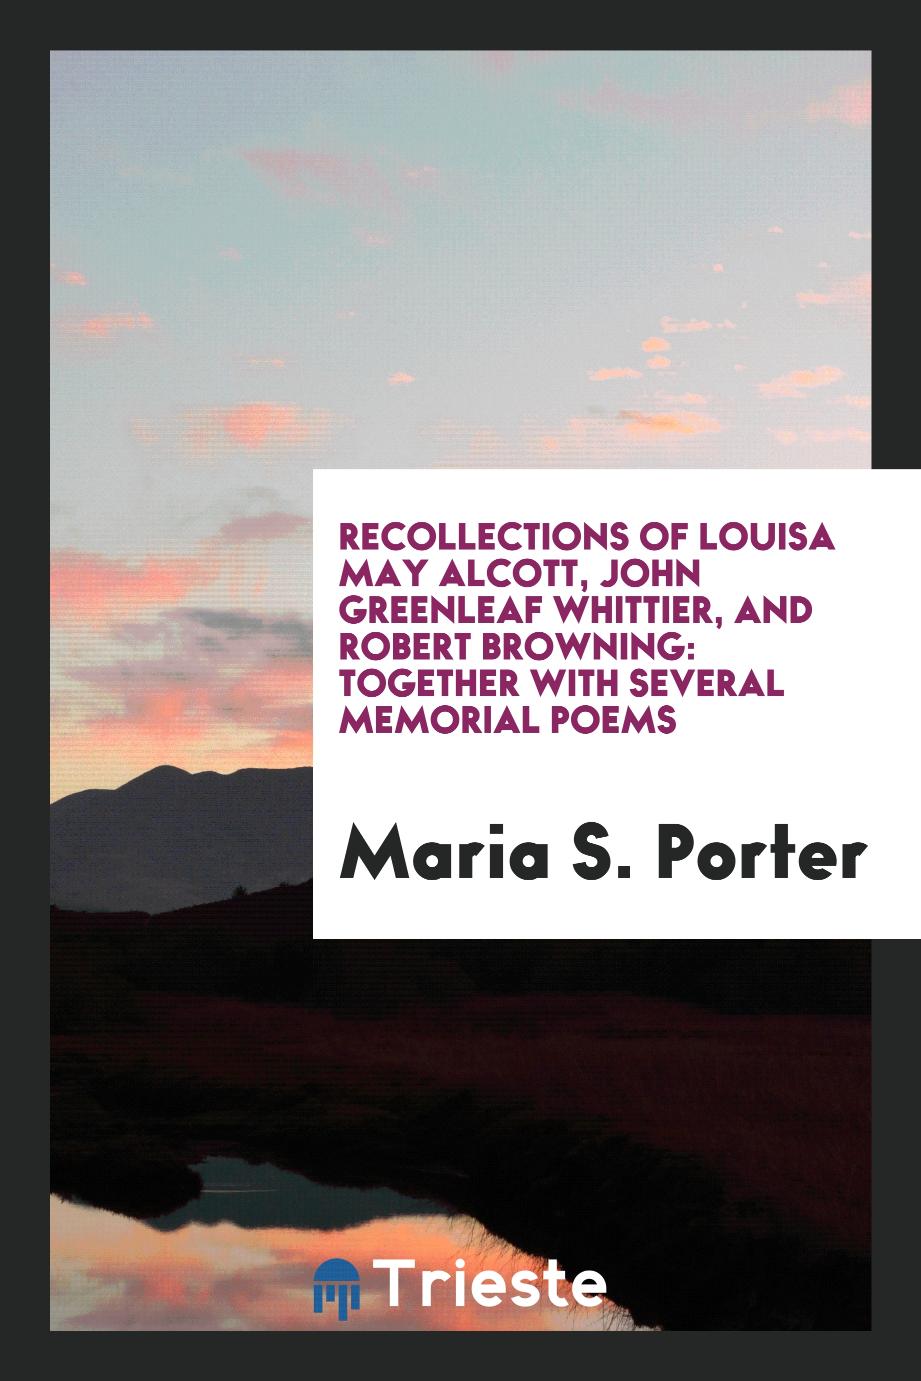 Recollections of Louisa May Alcott, John Greenleaf Whittier, and Robert Browning: Together with several memorial poems